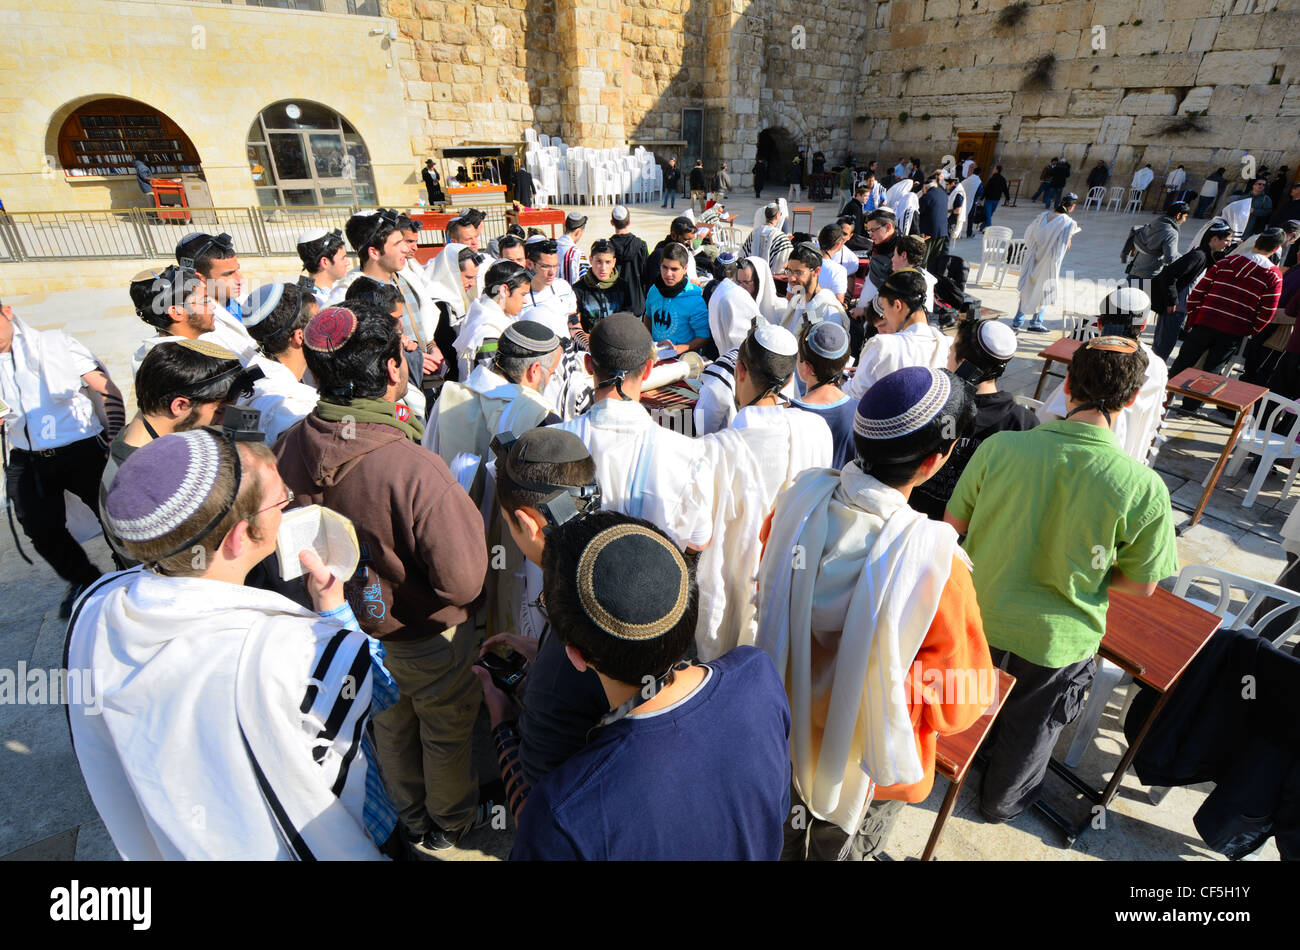 Crowds worship at the Western Wall, the holiest site in Judaism outside the Temple Mount itself in Jerusalem, Israel. Stock Photo